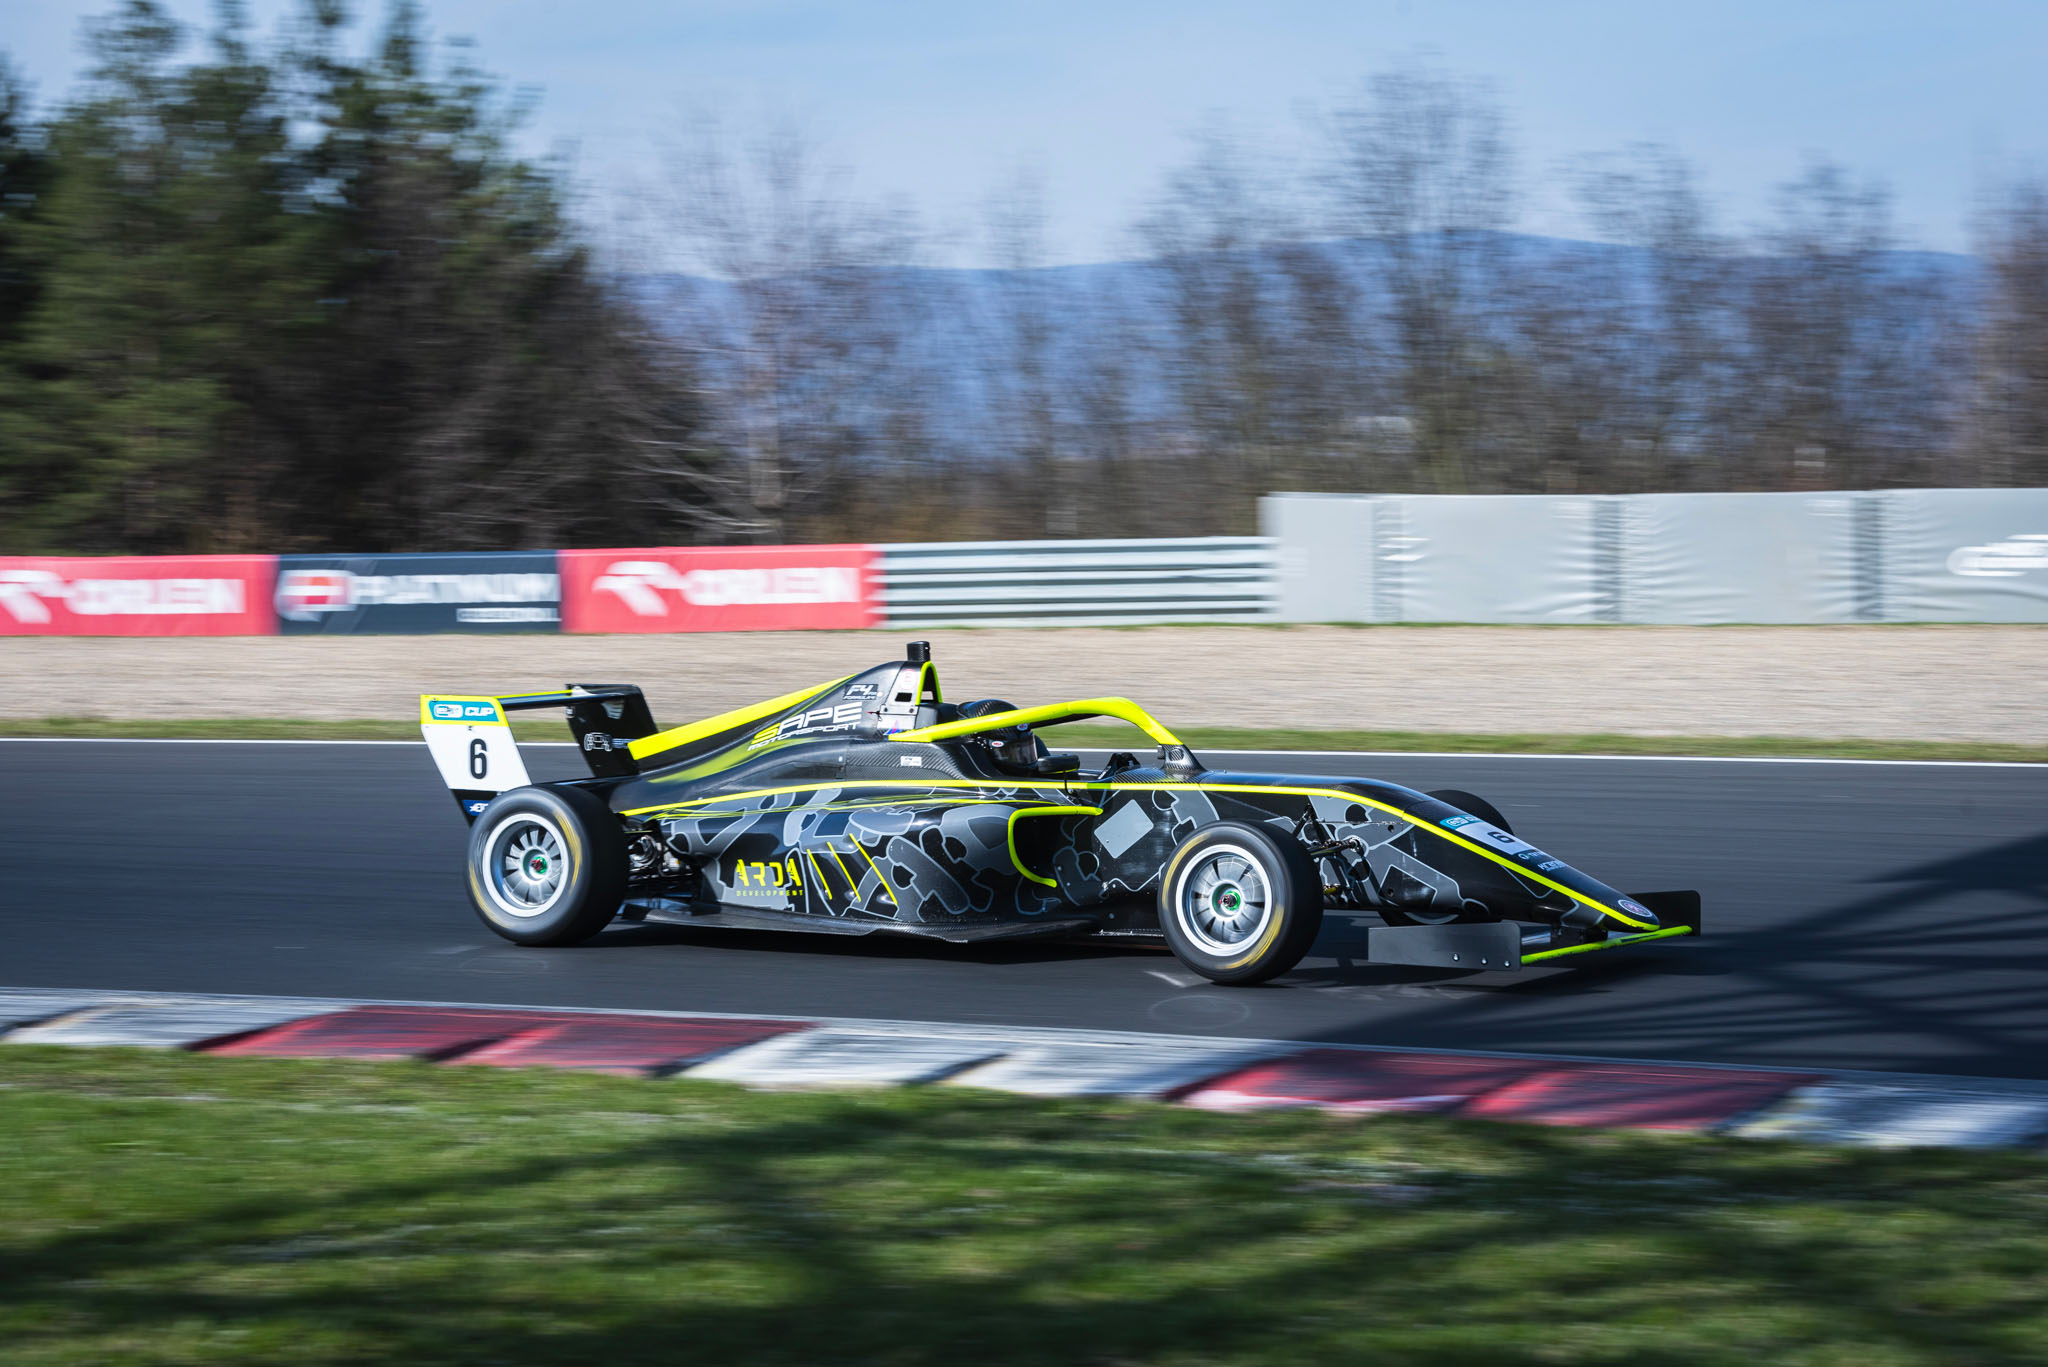 The F4 CEZ Academy is successful, a new generation of male and female racers are making their presence known